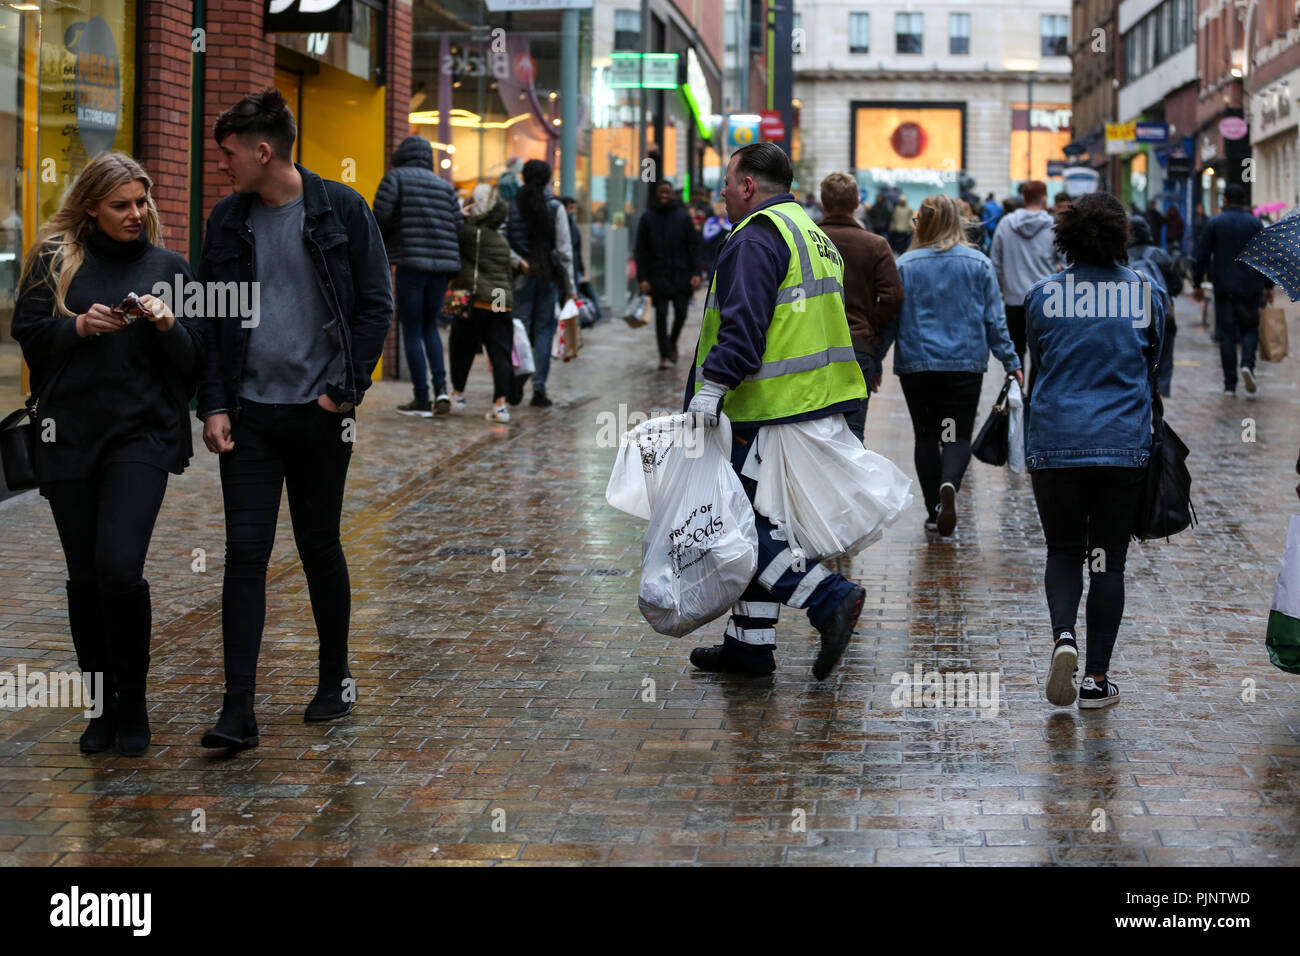 Leeds, UK. 21st Oct, 2017. A street cleaner seen walking in Leeds city  center.Leeds is the largest city in the northern English county of  Yorkshire. It has one of the supreme diverse